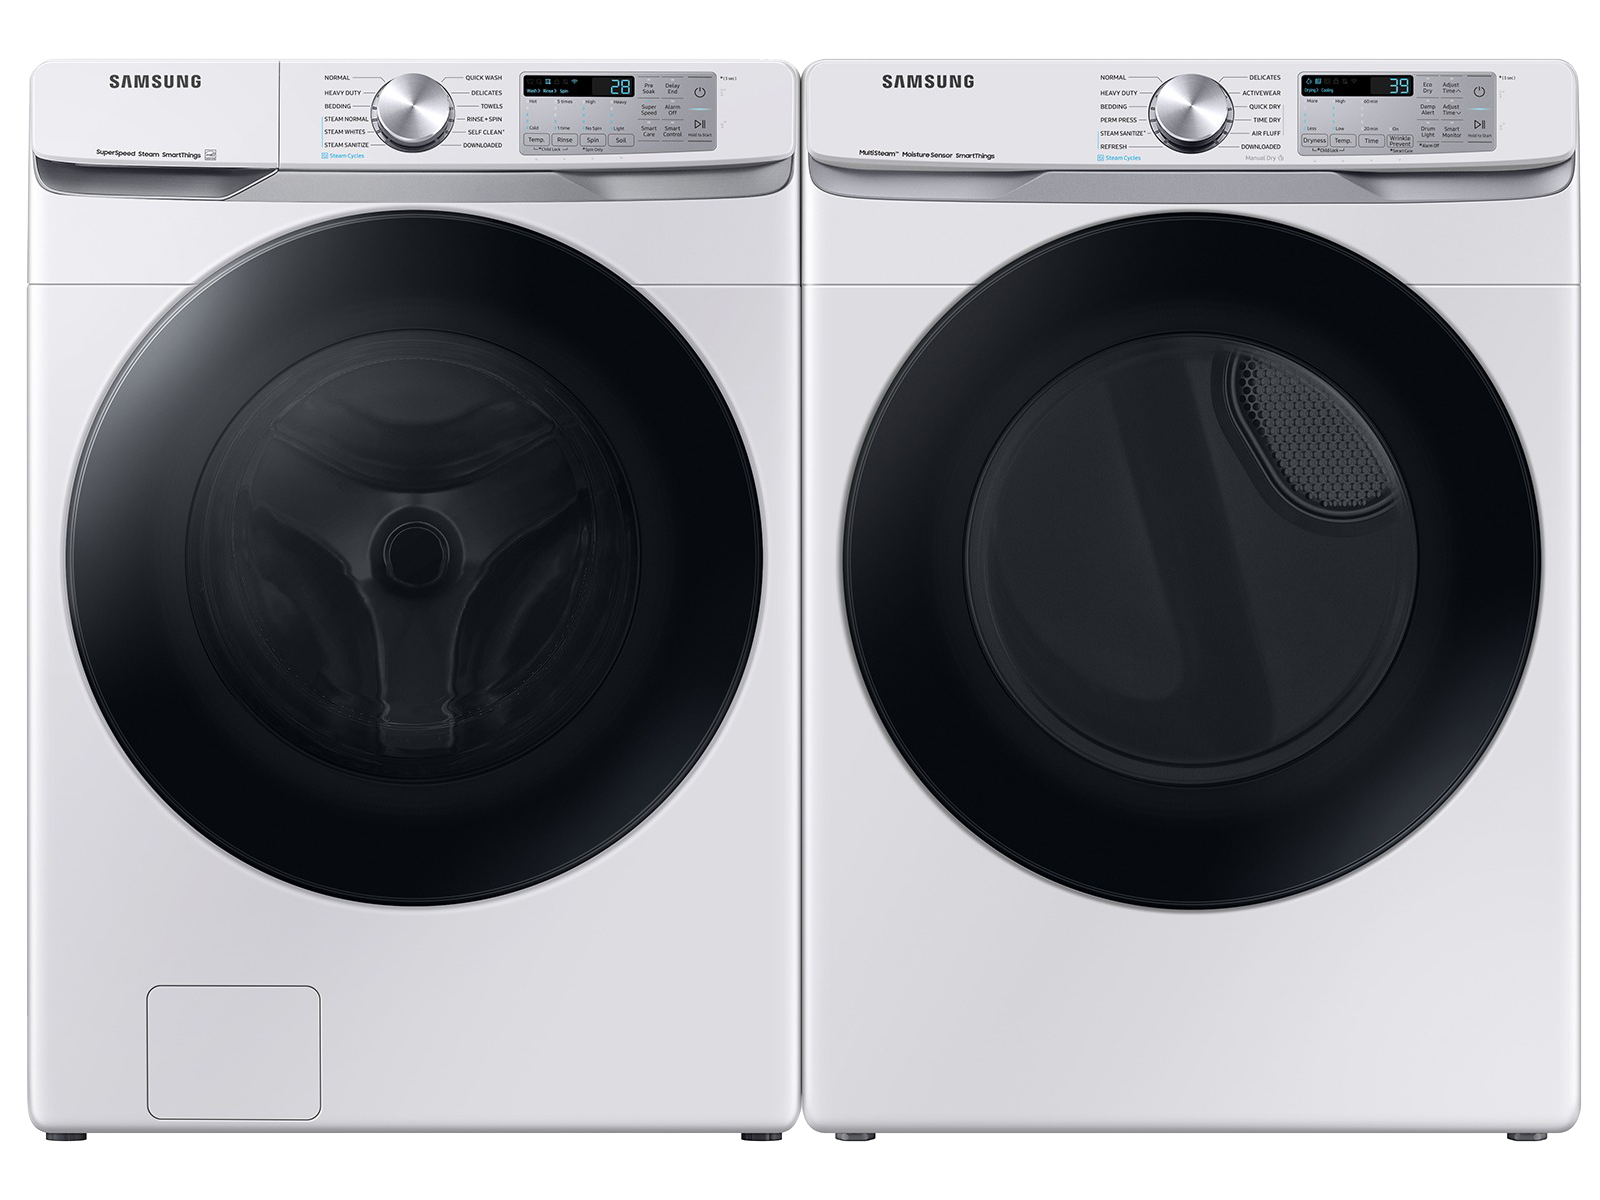 Samsung Large Capacity Smart Front Load Washer with Super Speed Wash & Smart Gas Dryer with Steam Sanitize+ in White(BNDL-1651775156236)